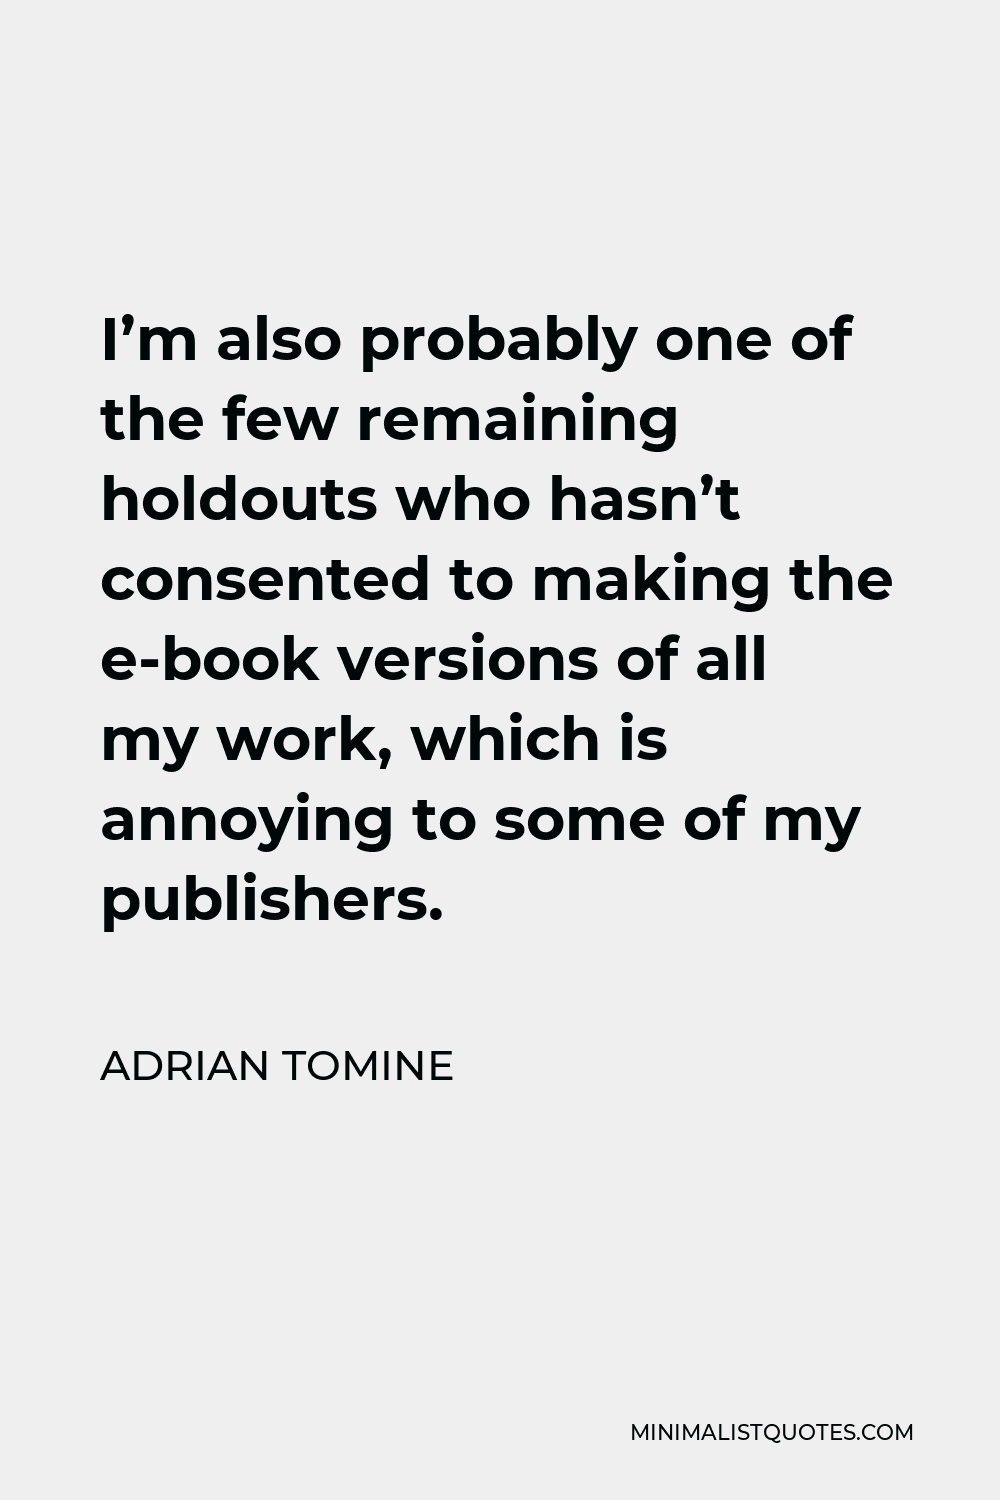 Adrian Tomine Quote - I’m also probably one of the few remaining holdouts who hasn’t consented to making the e-book versions of all my work, which is annoying to some of my publishers.